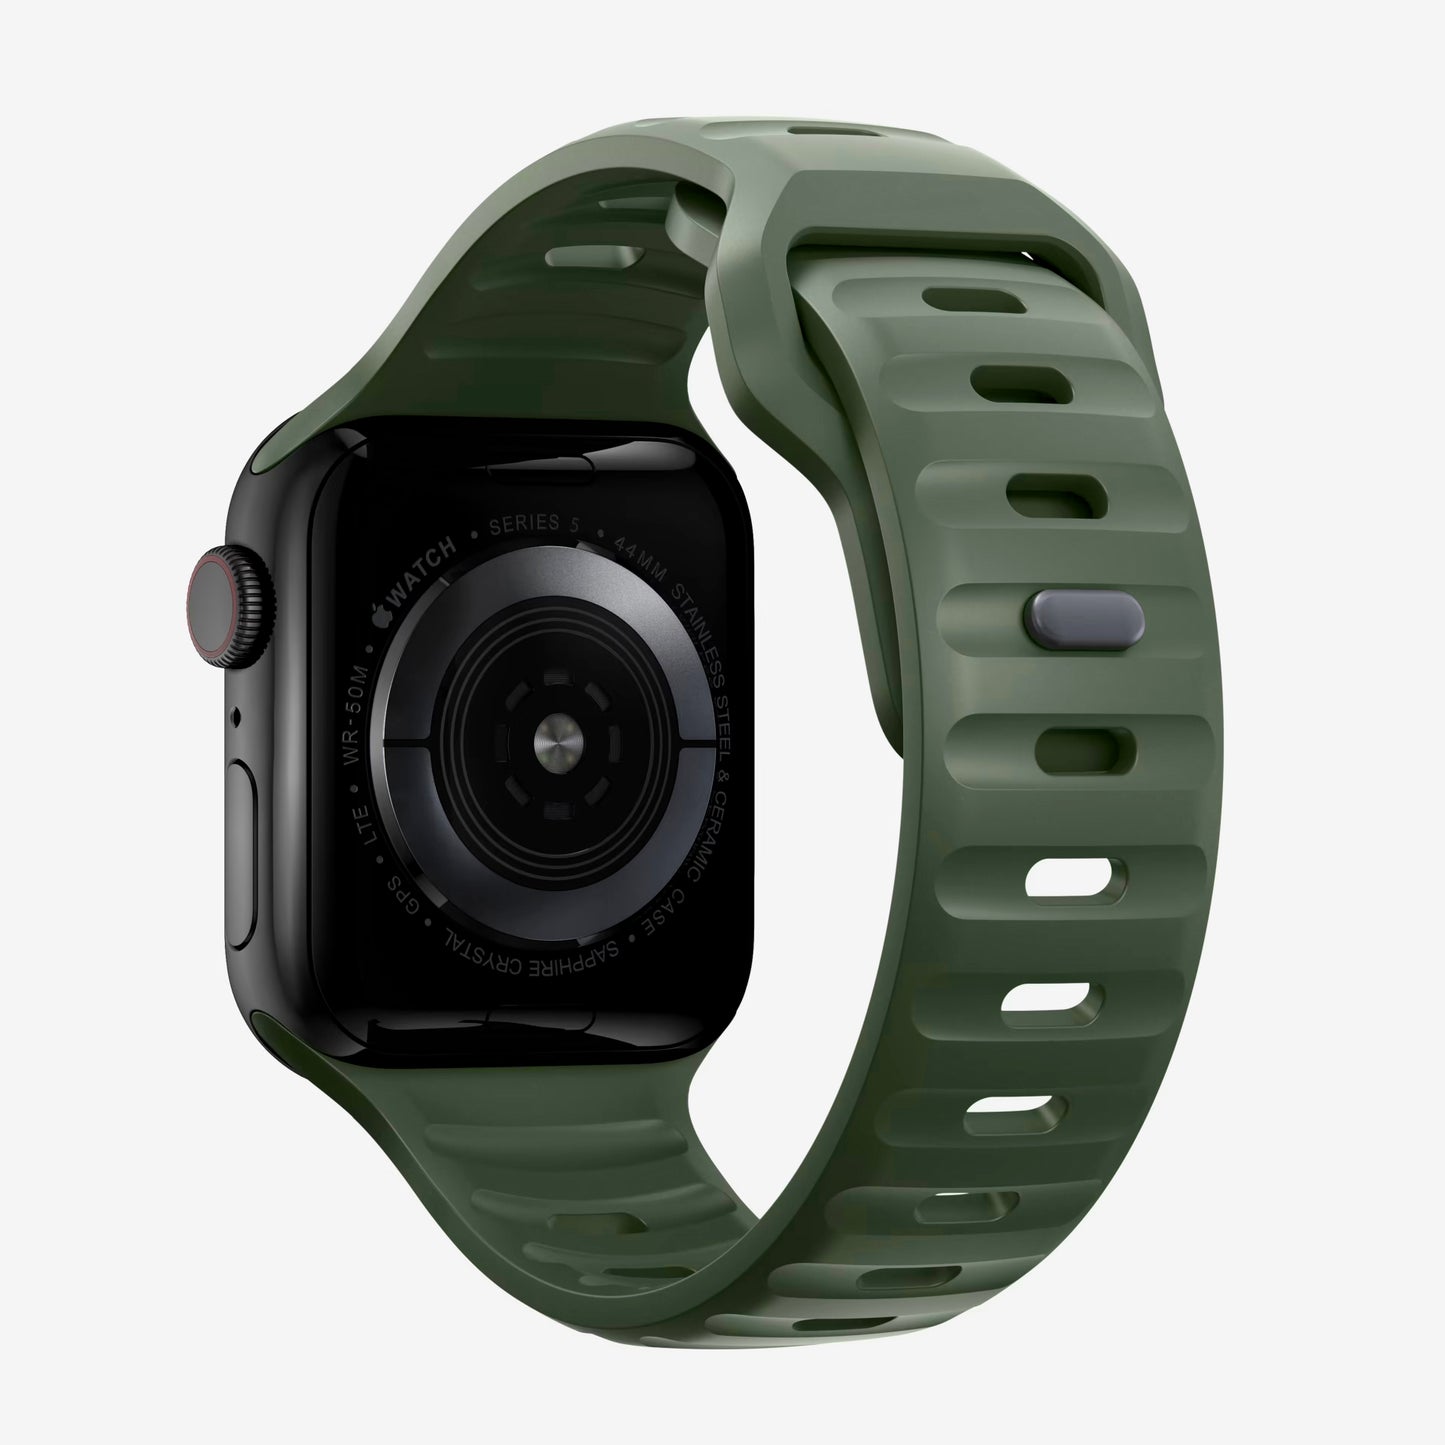 An army green colour silicon watch strap with a grooved interior design for apple watch made for sports and active activities